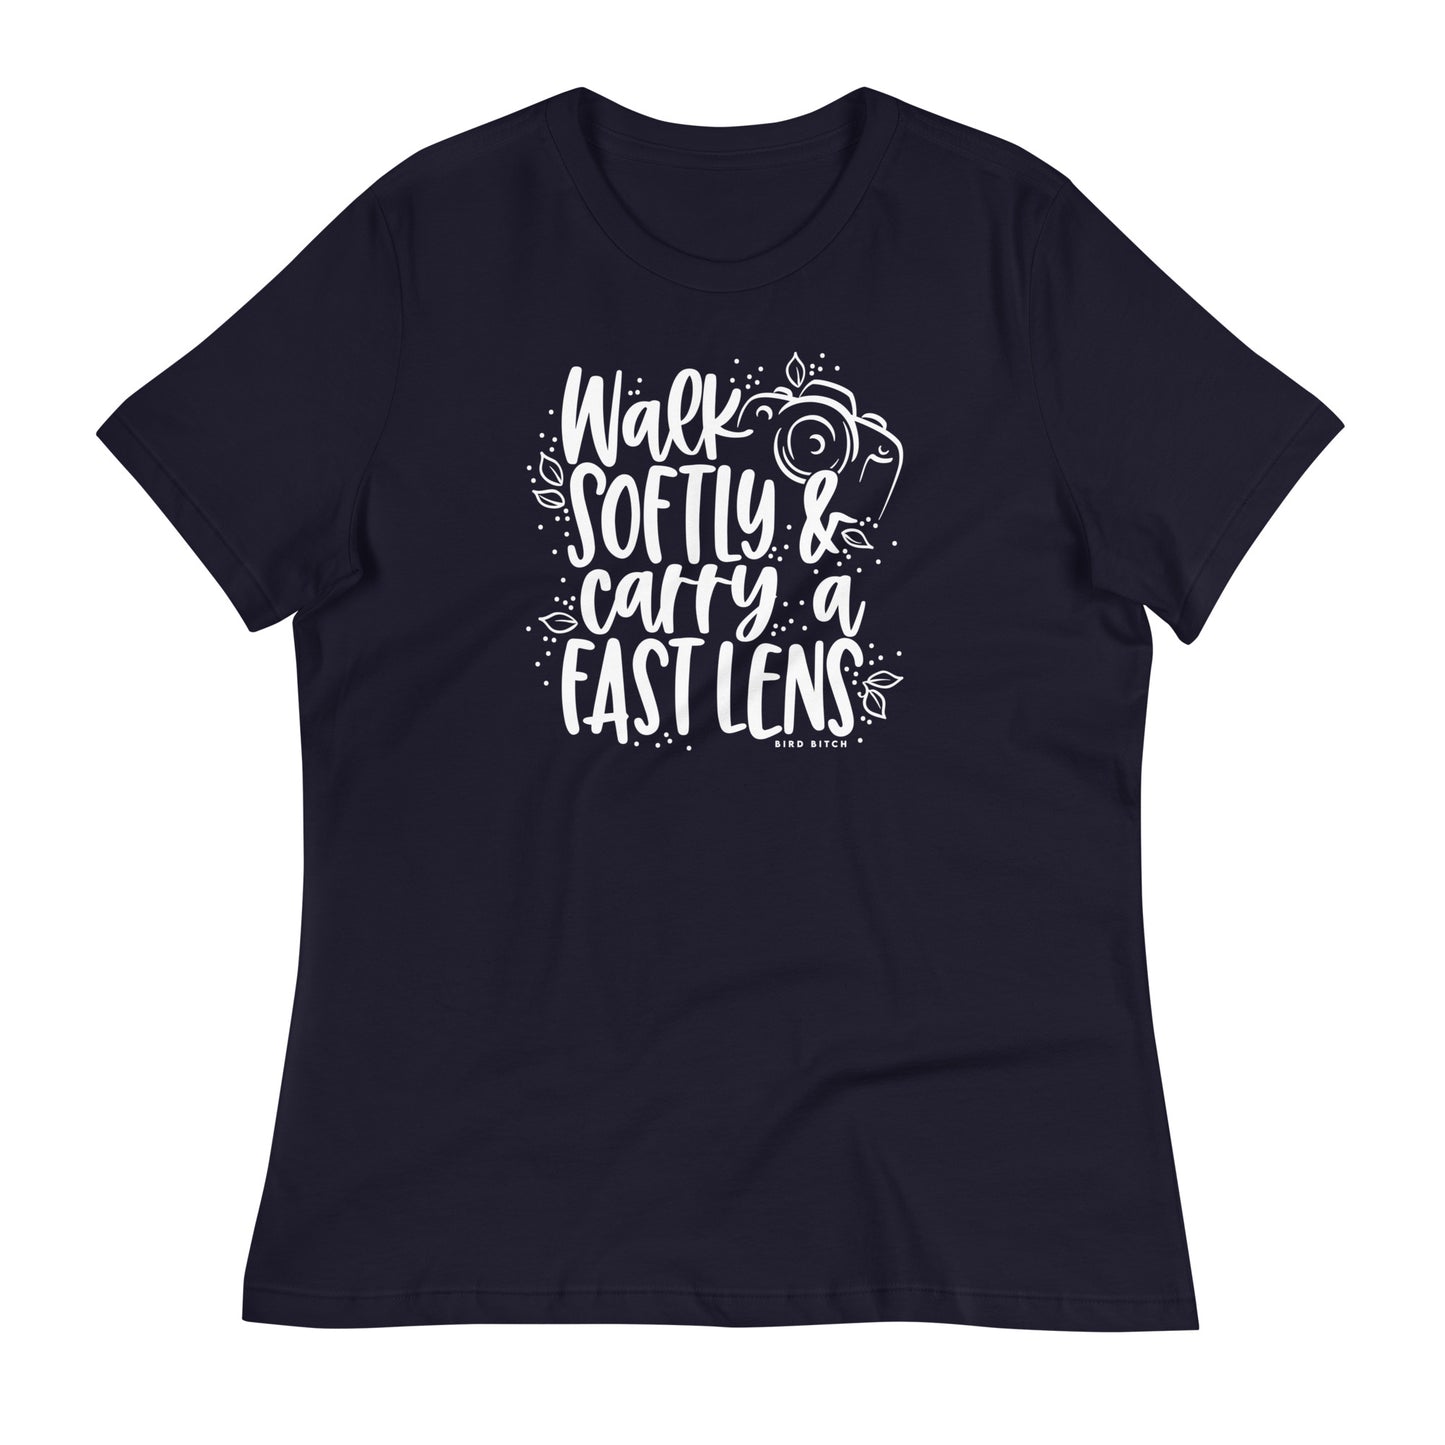 Walk Softly & Carry a Fast Lens, Women's Relaxed T-Shirt